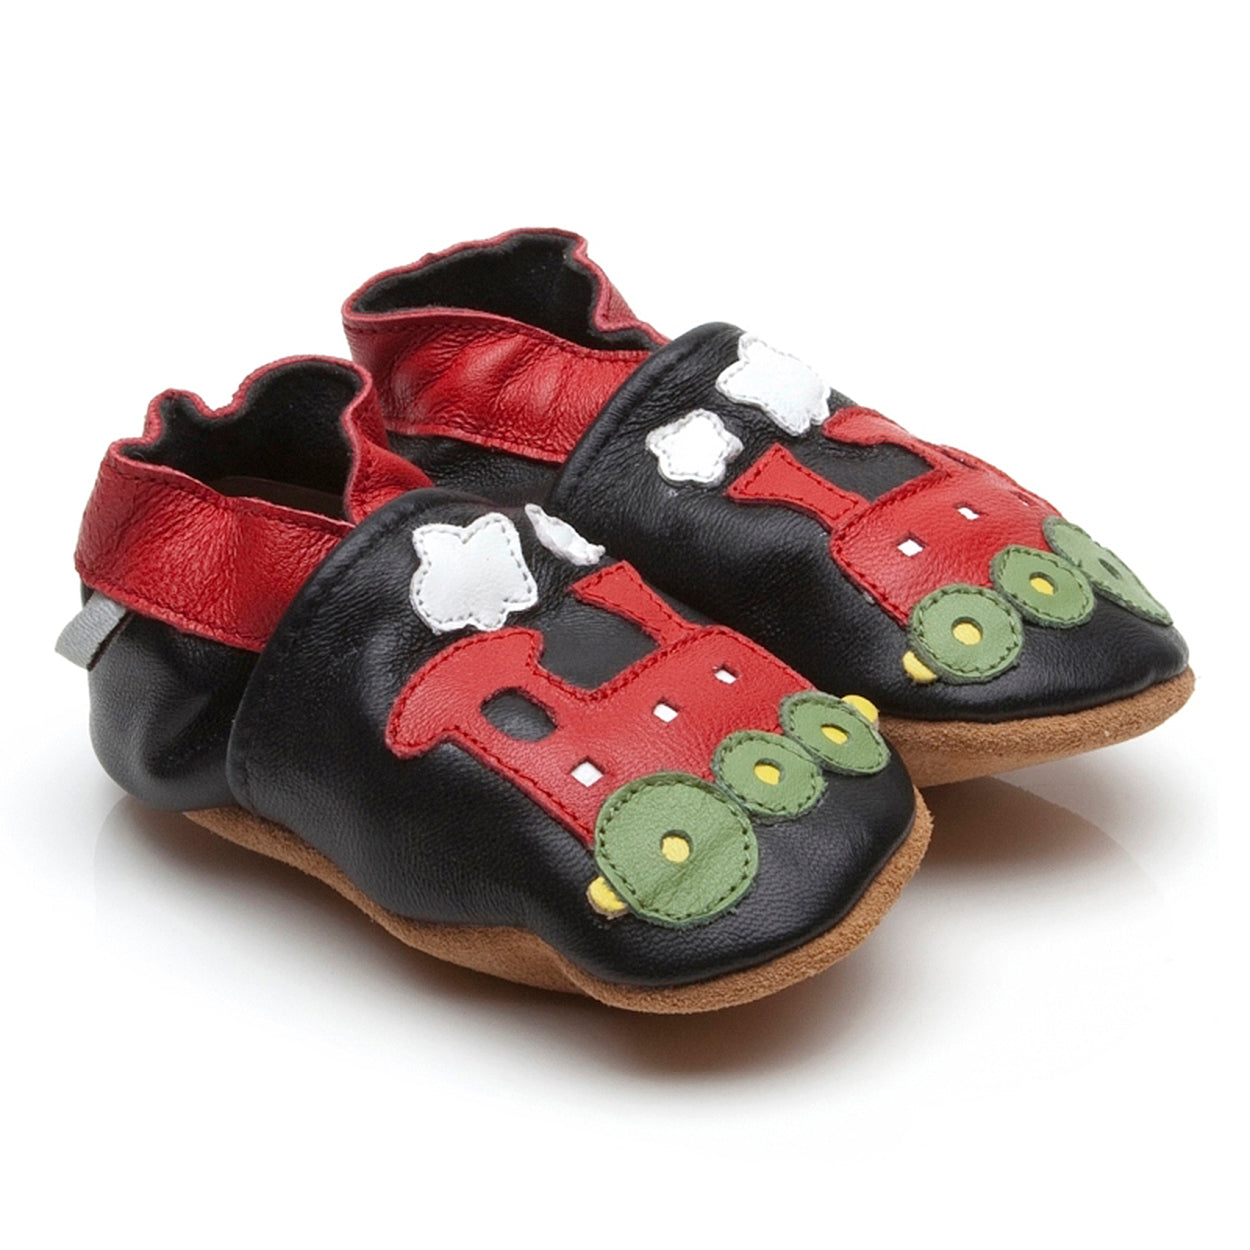 Soft Leather Baby Shoes Train